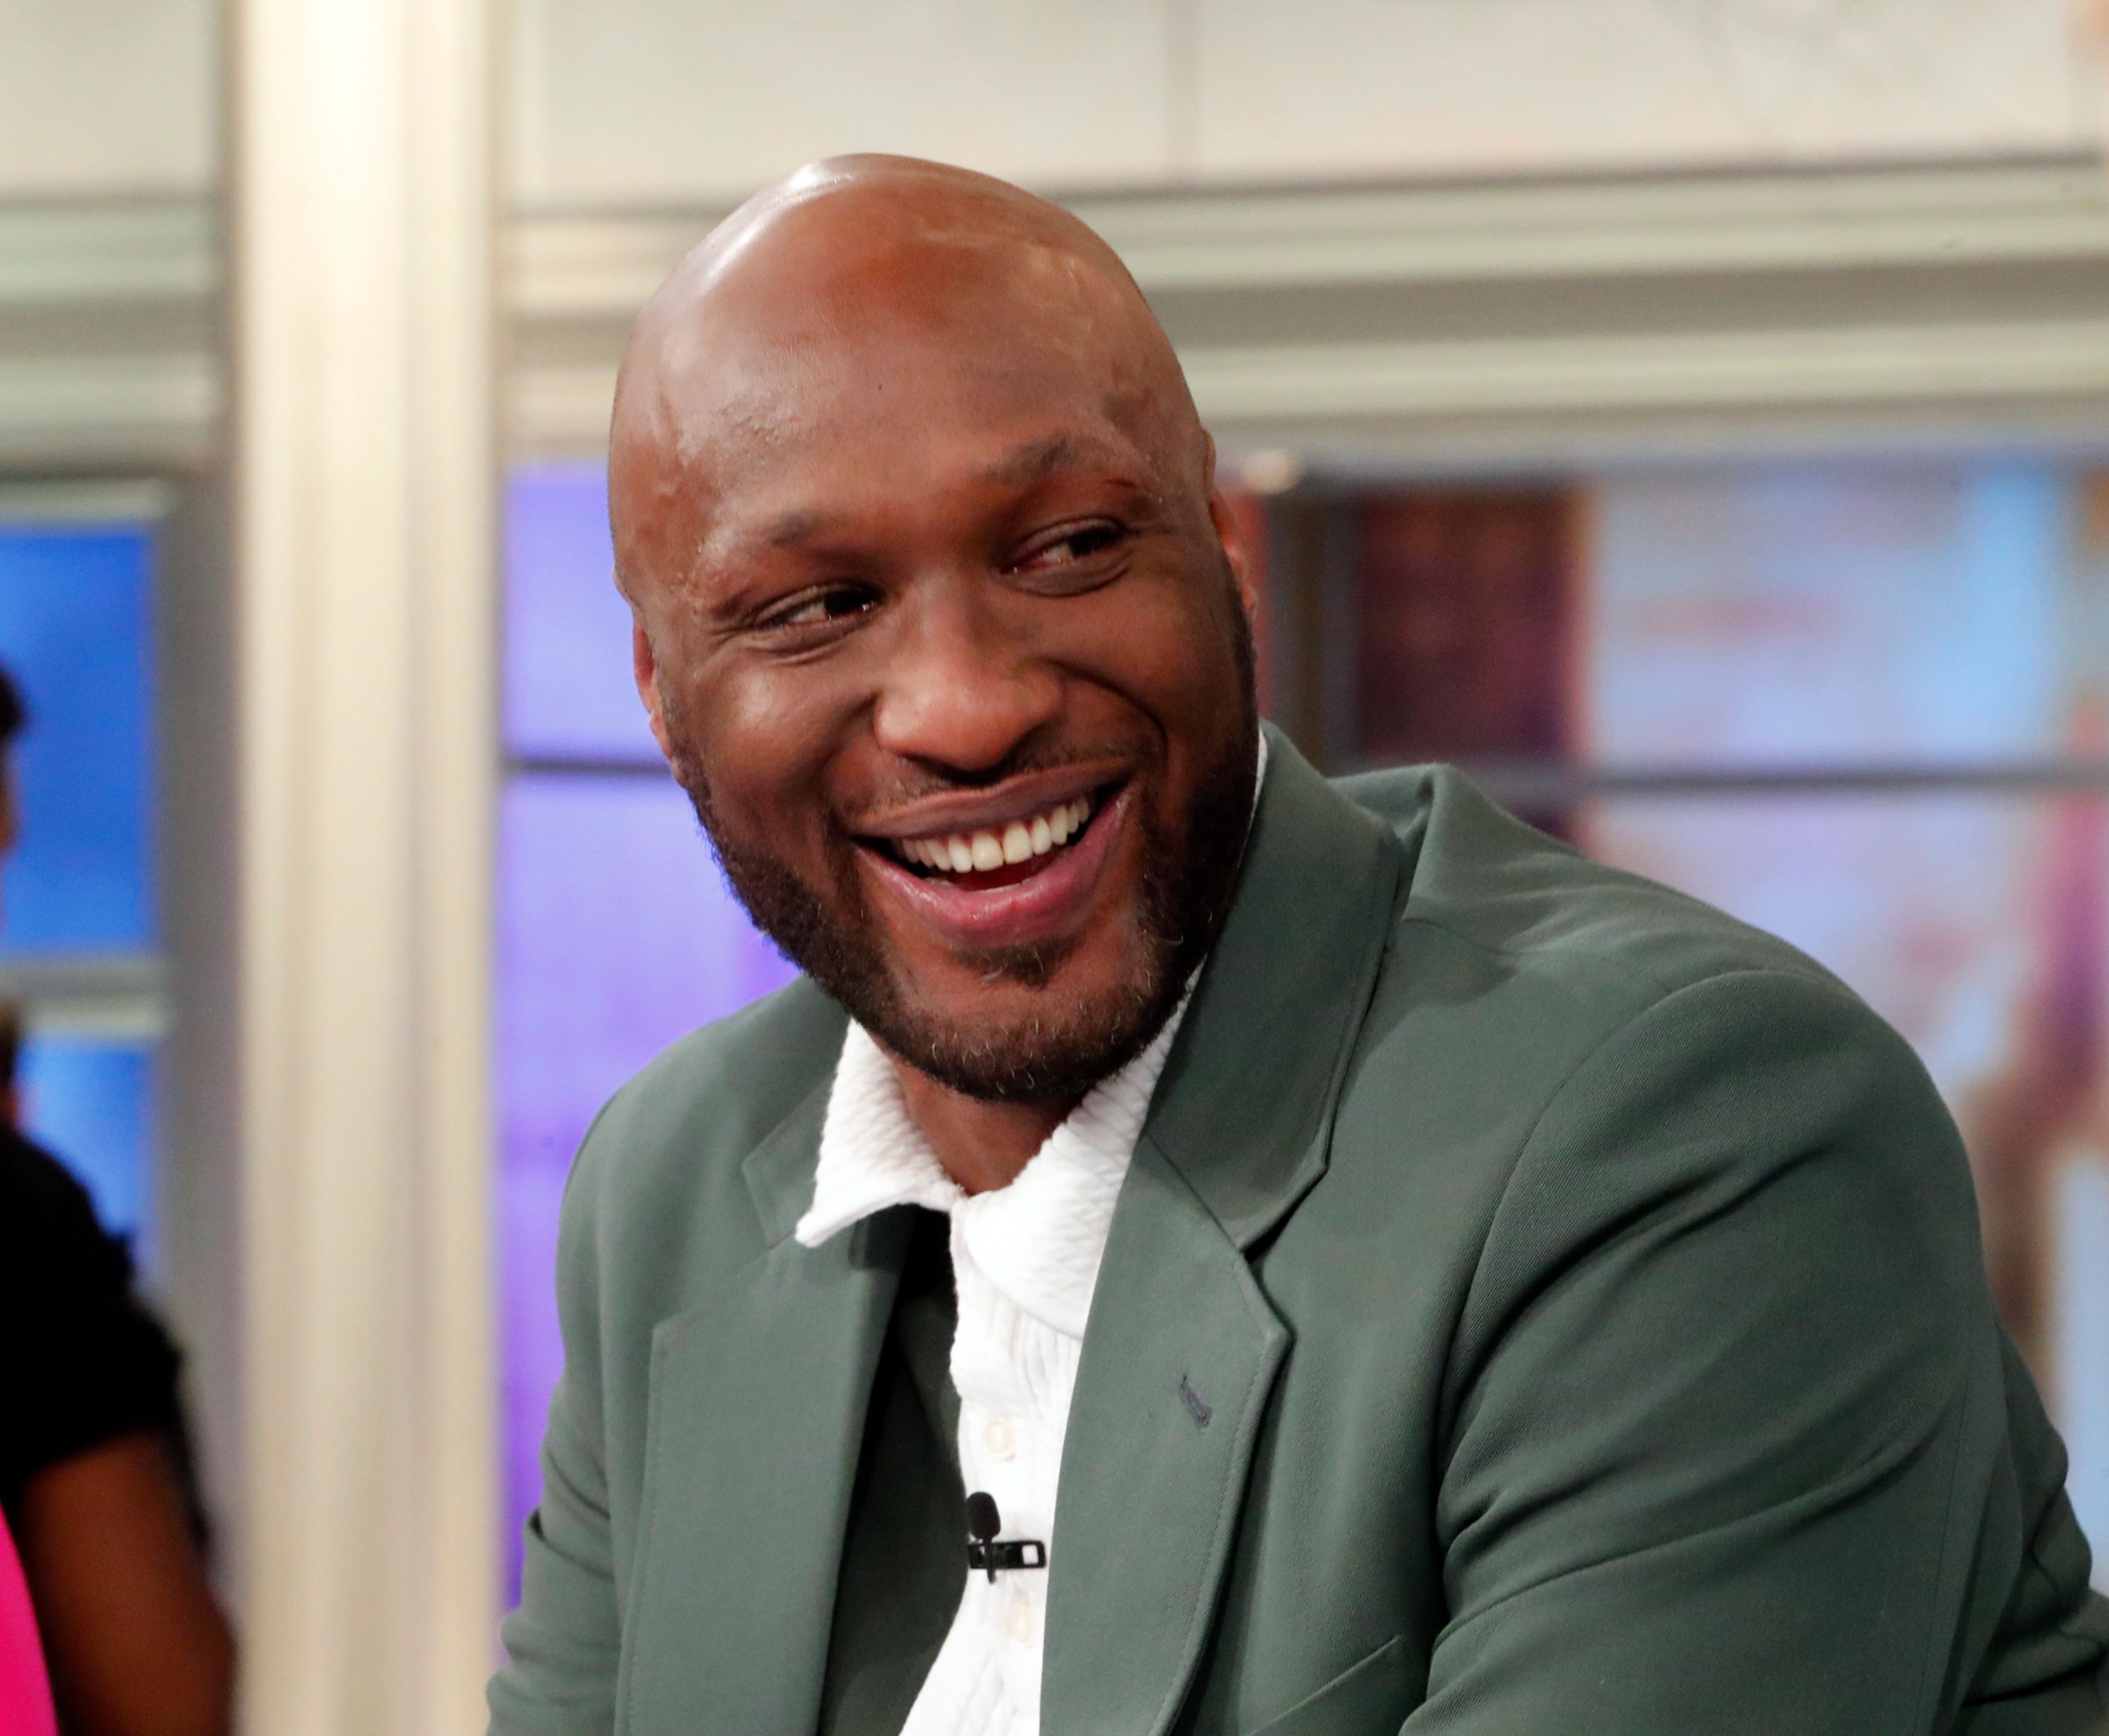  Lamar Odom appears on Walt Disney Television "The View" on May 28, 2019 | Photo: Getty Images